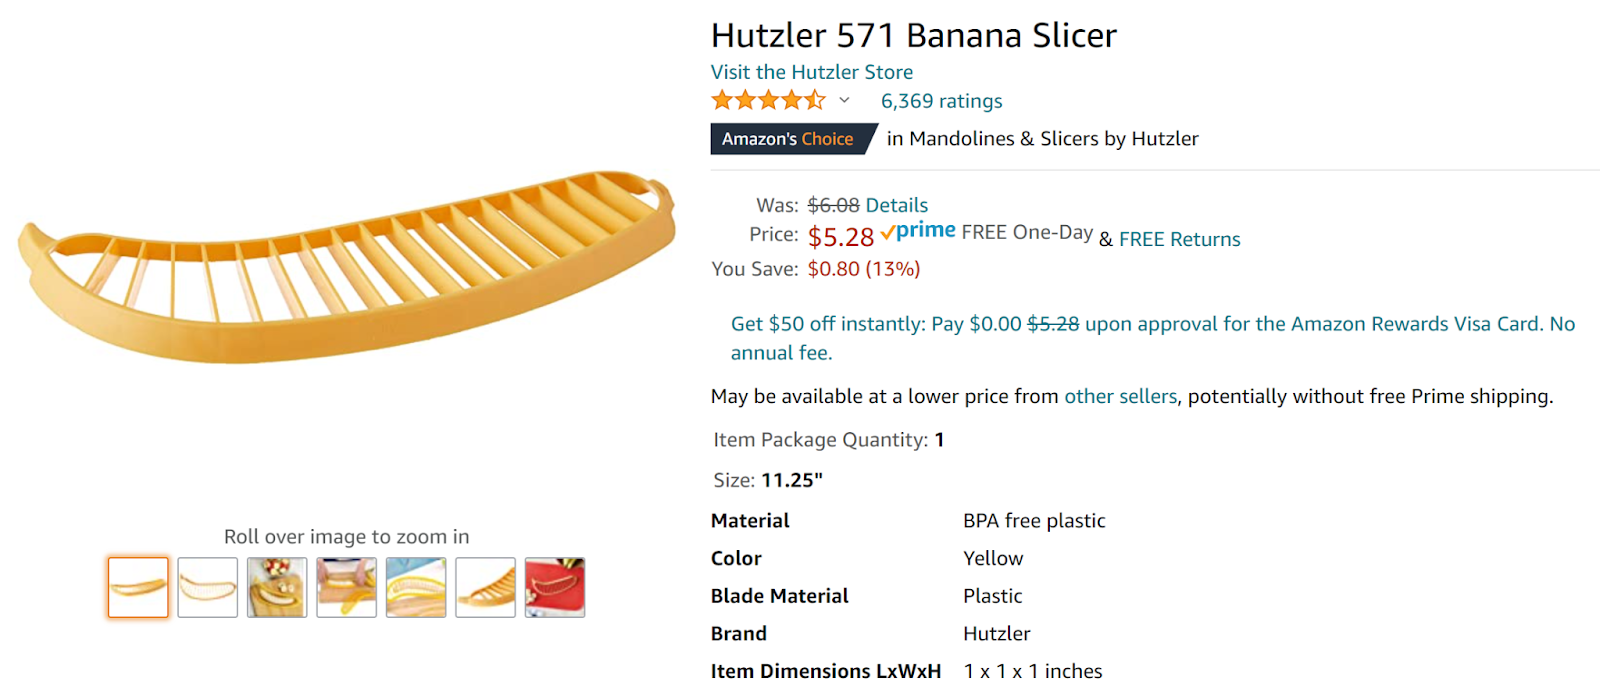 Screenshot of Amazon page for the Hutzler 571 Banana Slicer. The slicer is a flat piece of plastic roughly in the shape of a banana, but wider. It is hollow with rows of thin plastic slicers across it, so when it is pressed down onto a banana, it will turn the whole banana into about equal size slices. It costs $5.28.